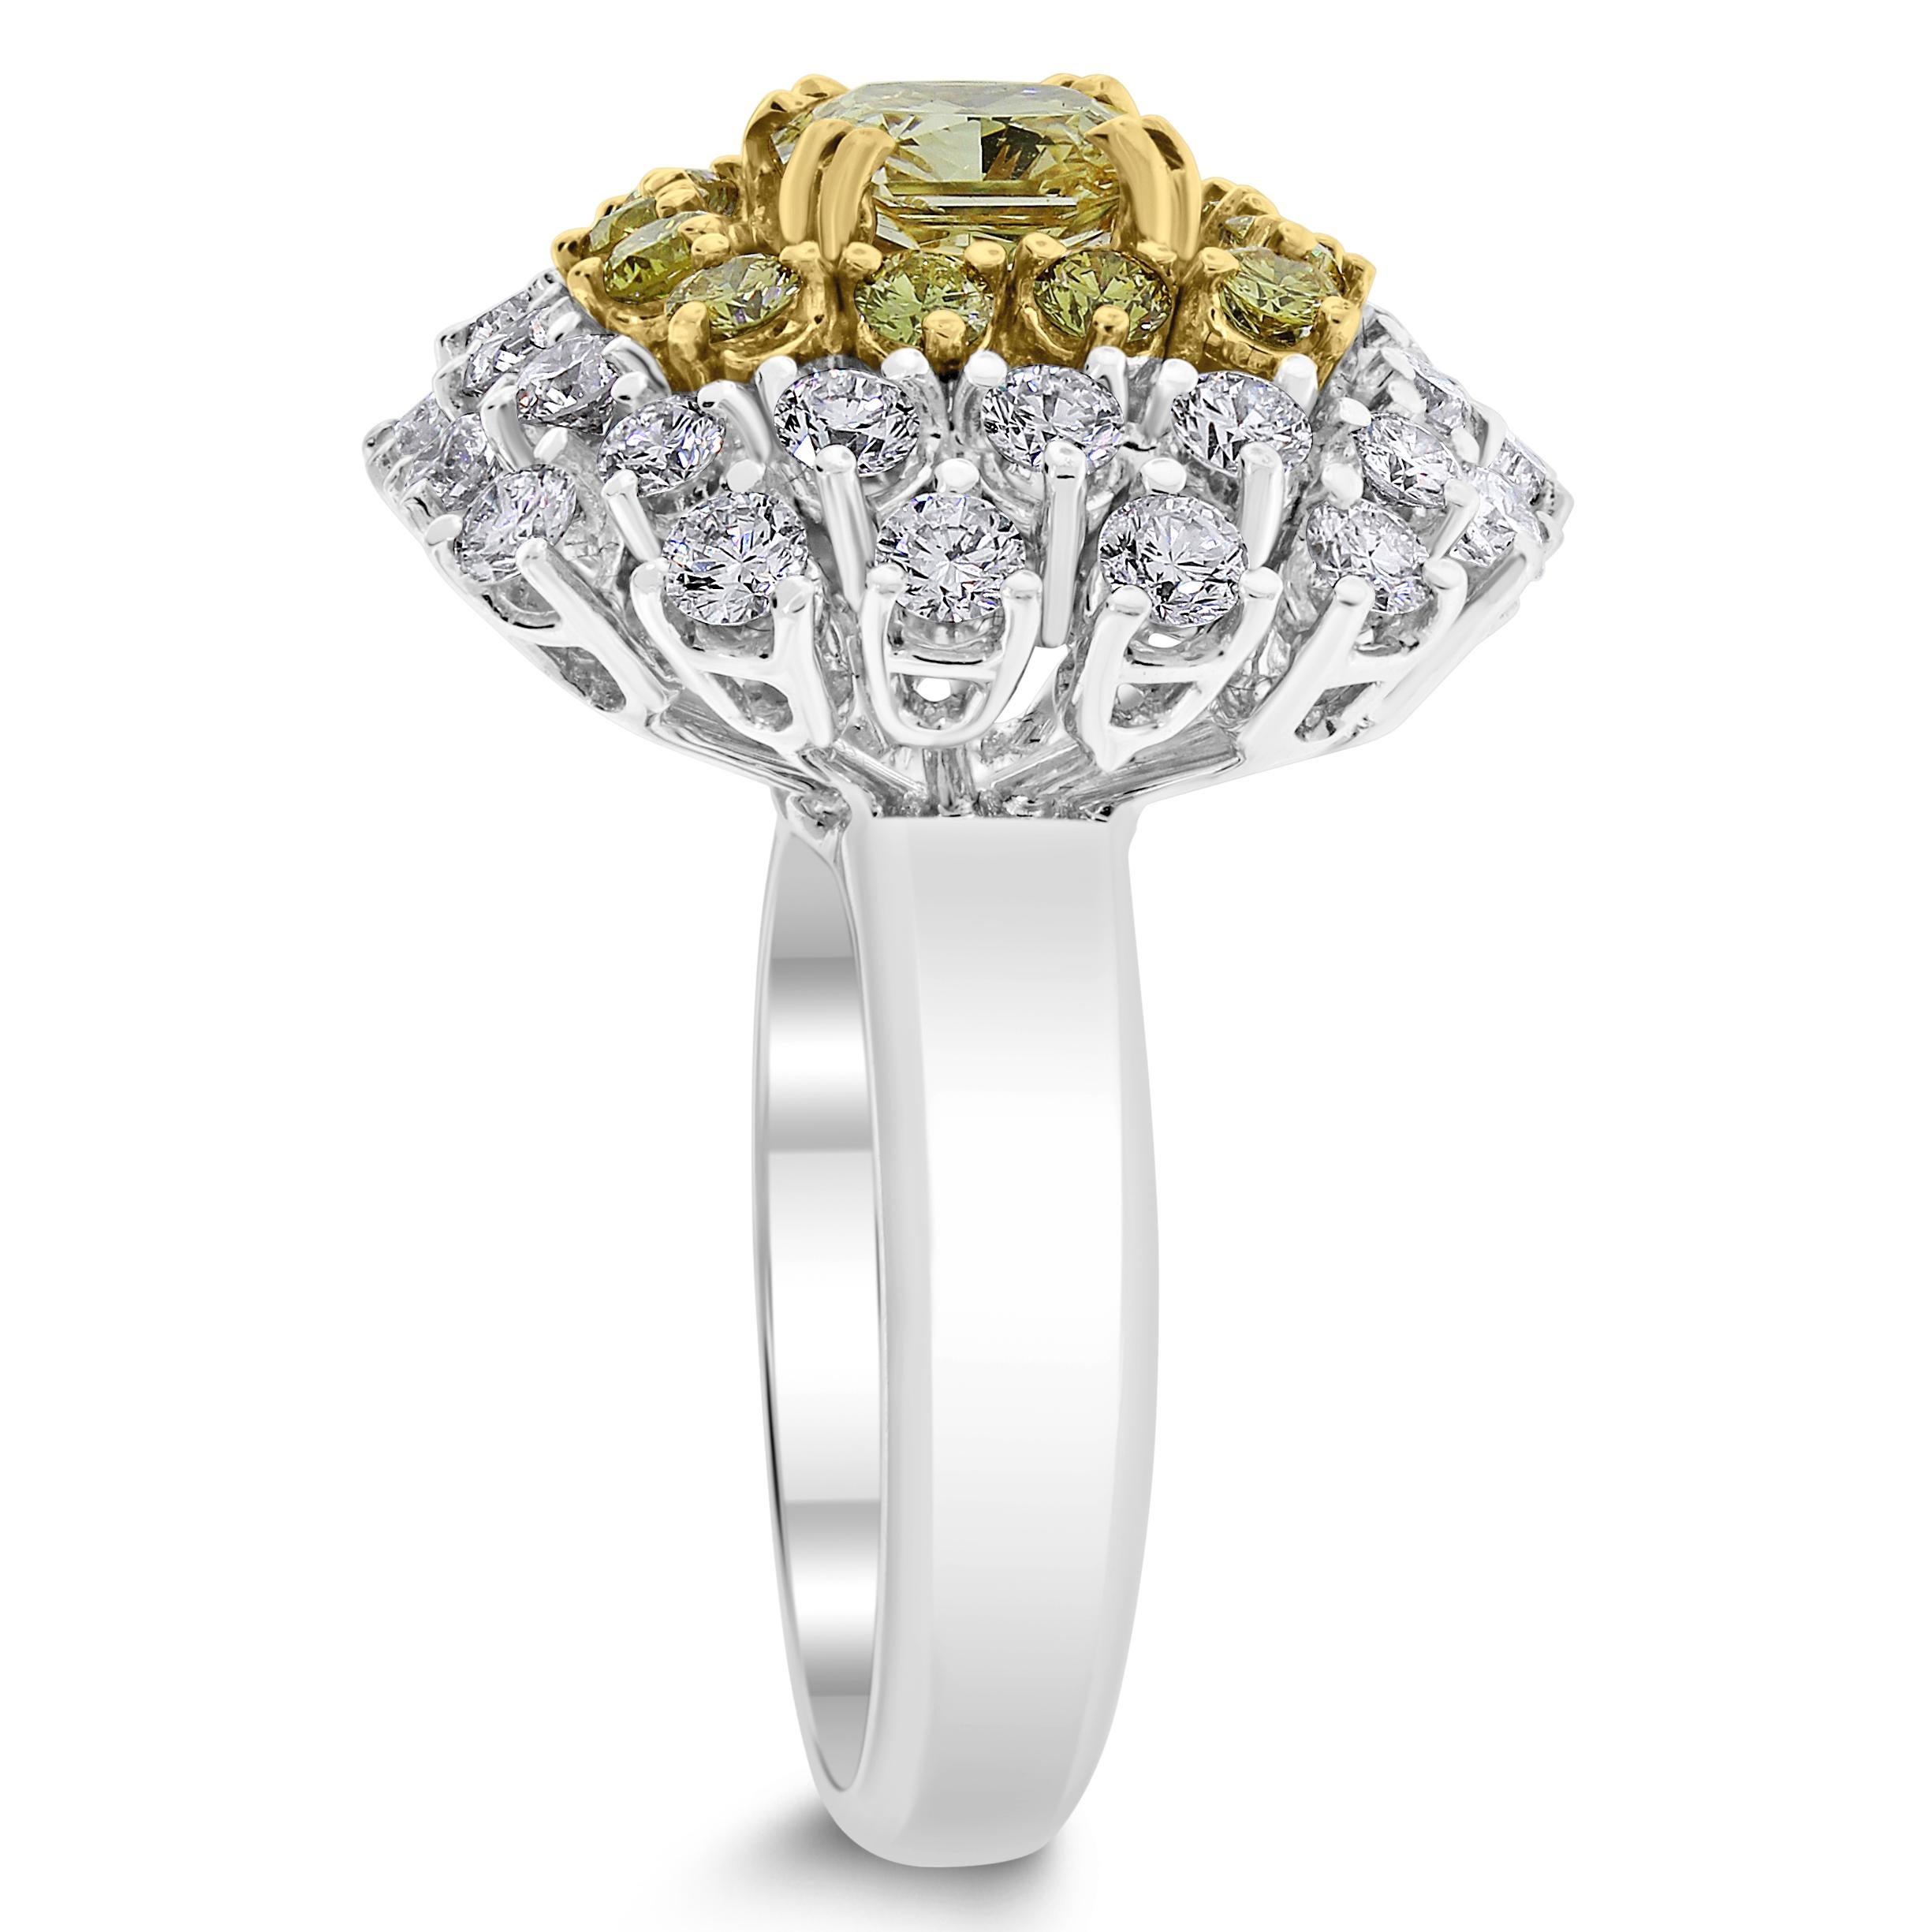 Colorful and pronounced, the Genelia ring brings together sunshine and starlight with a combination of yellow and white diamonds. The center radiant dazzles while the concentric halos of yellow and white diamonds highlight its beauty and